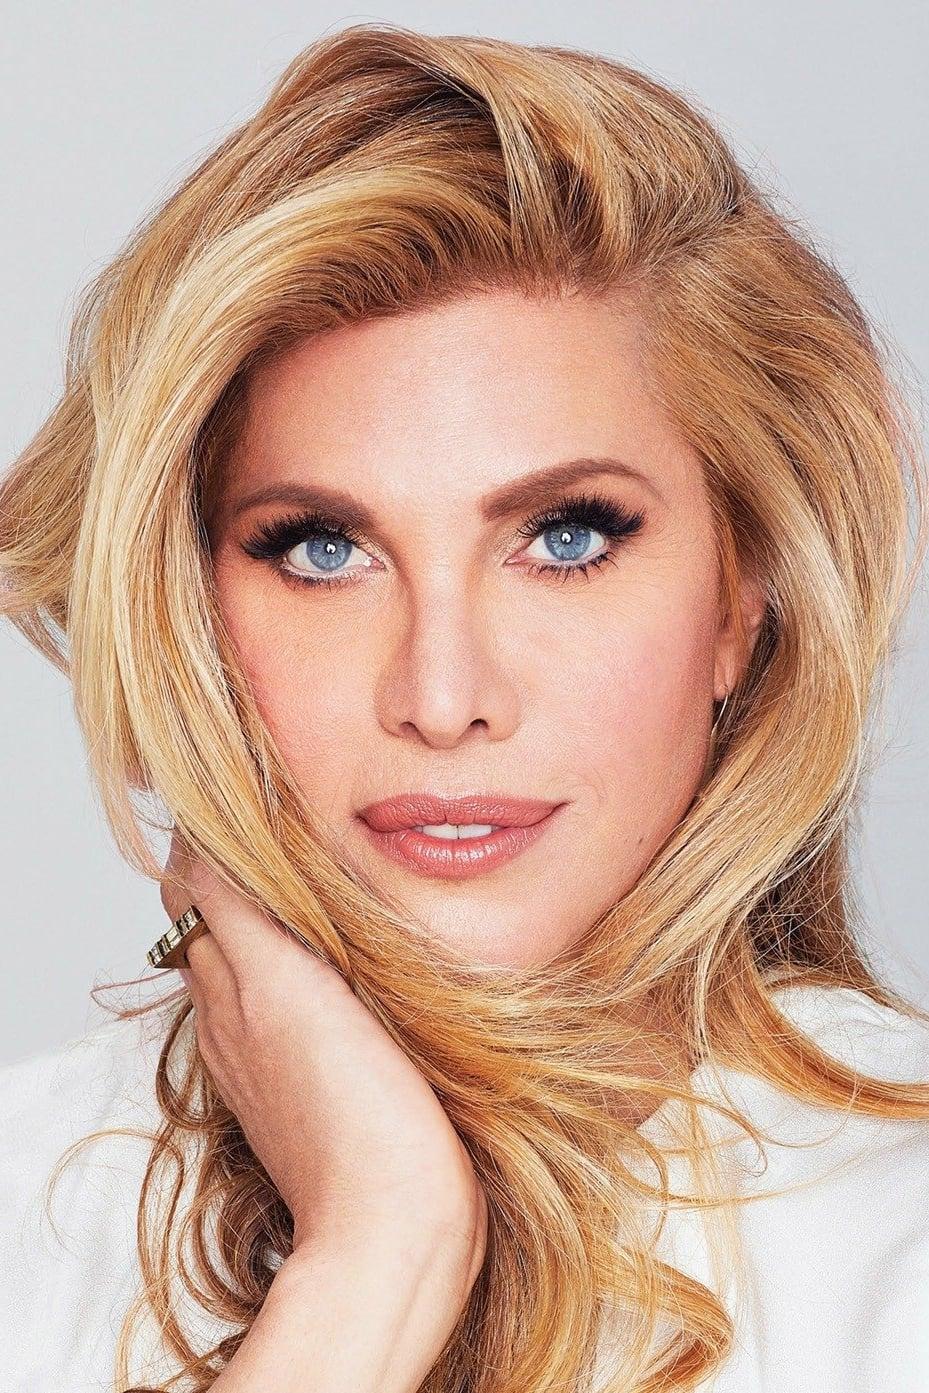 Candis Cayne | Candis Cayne